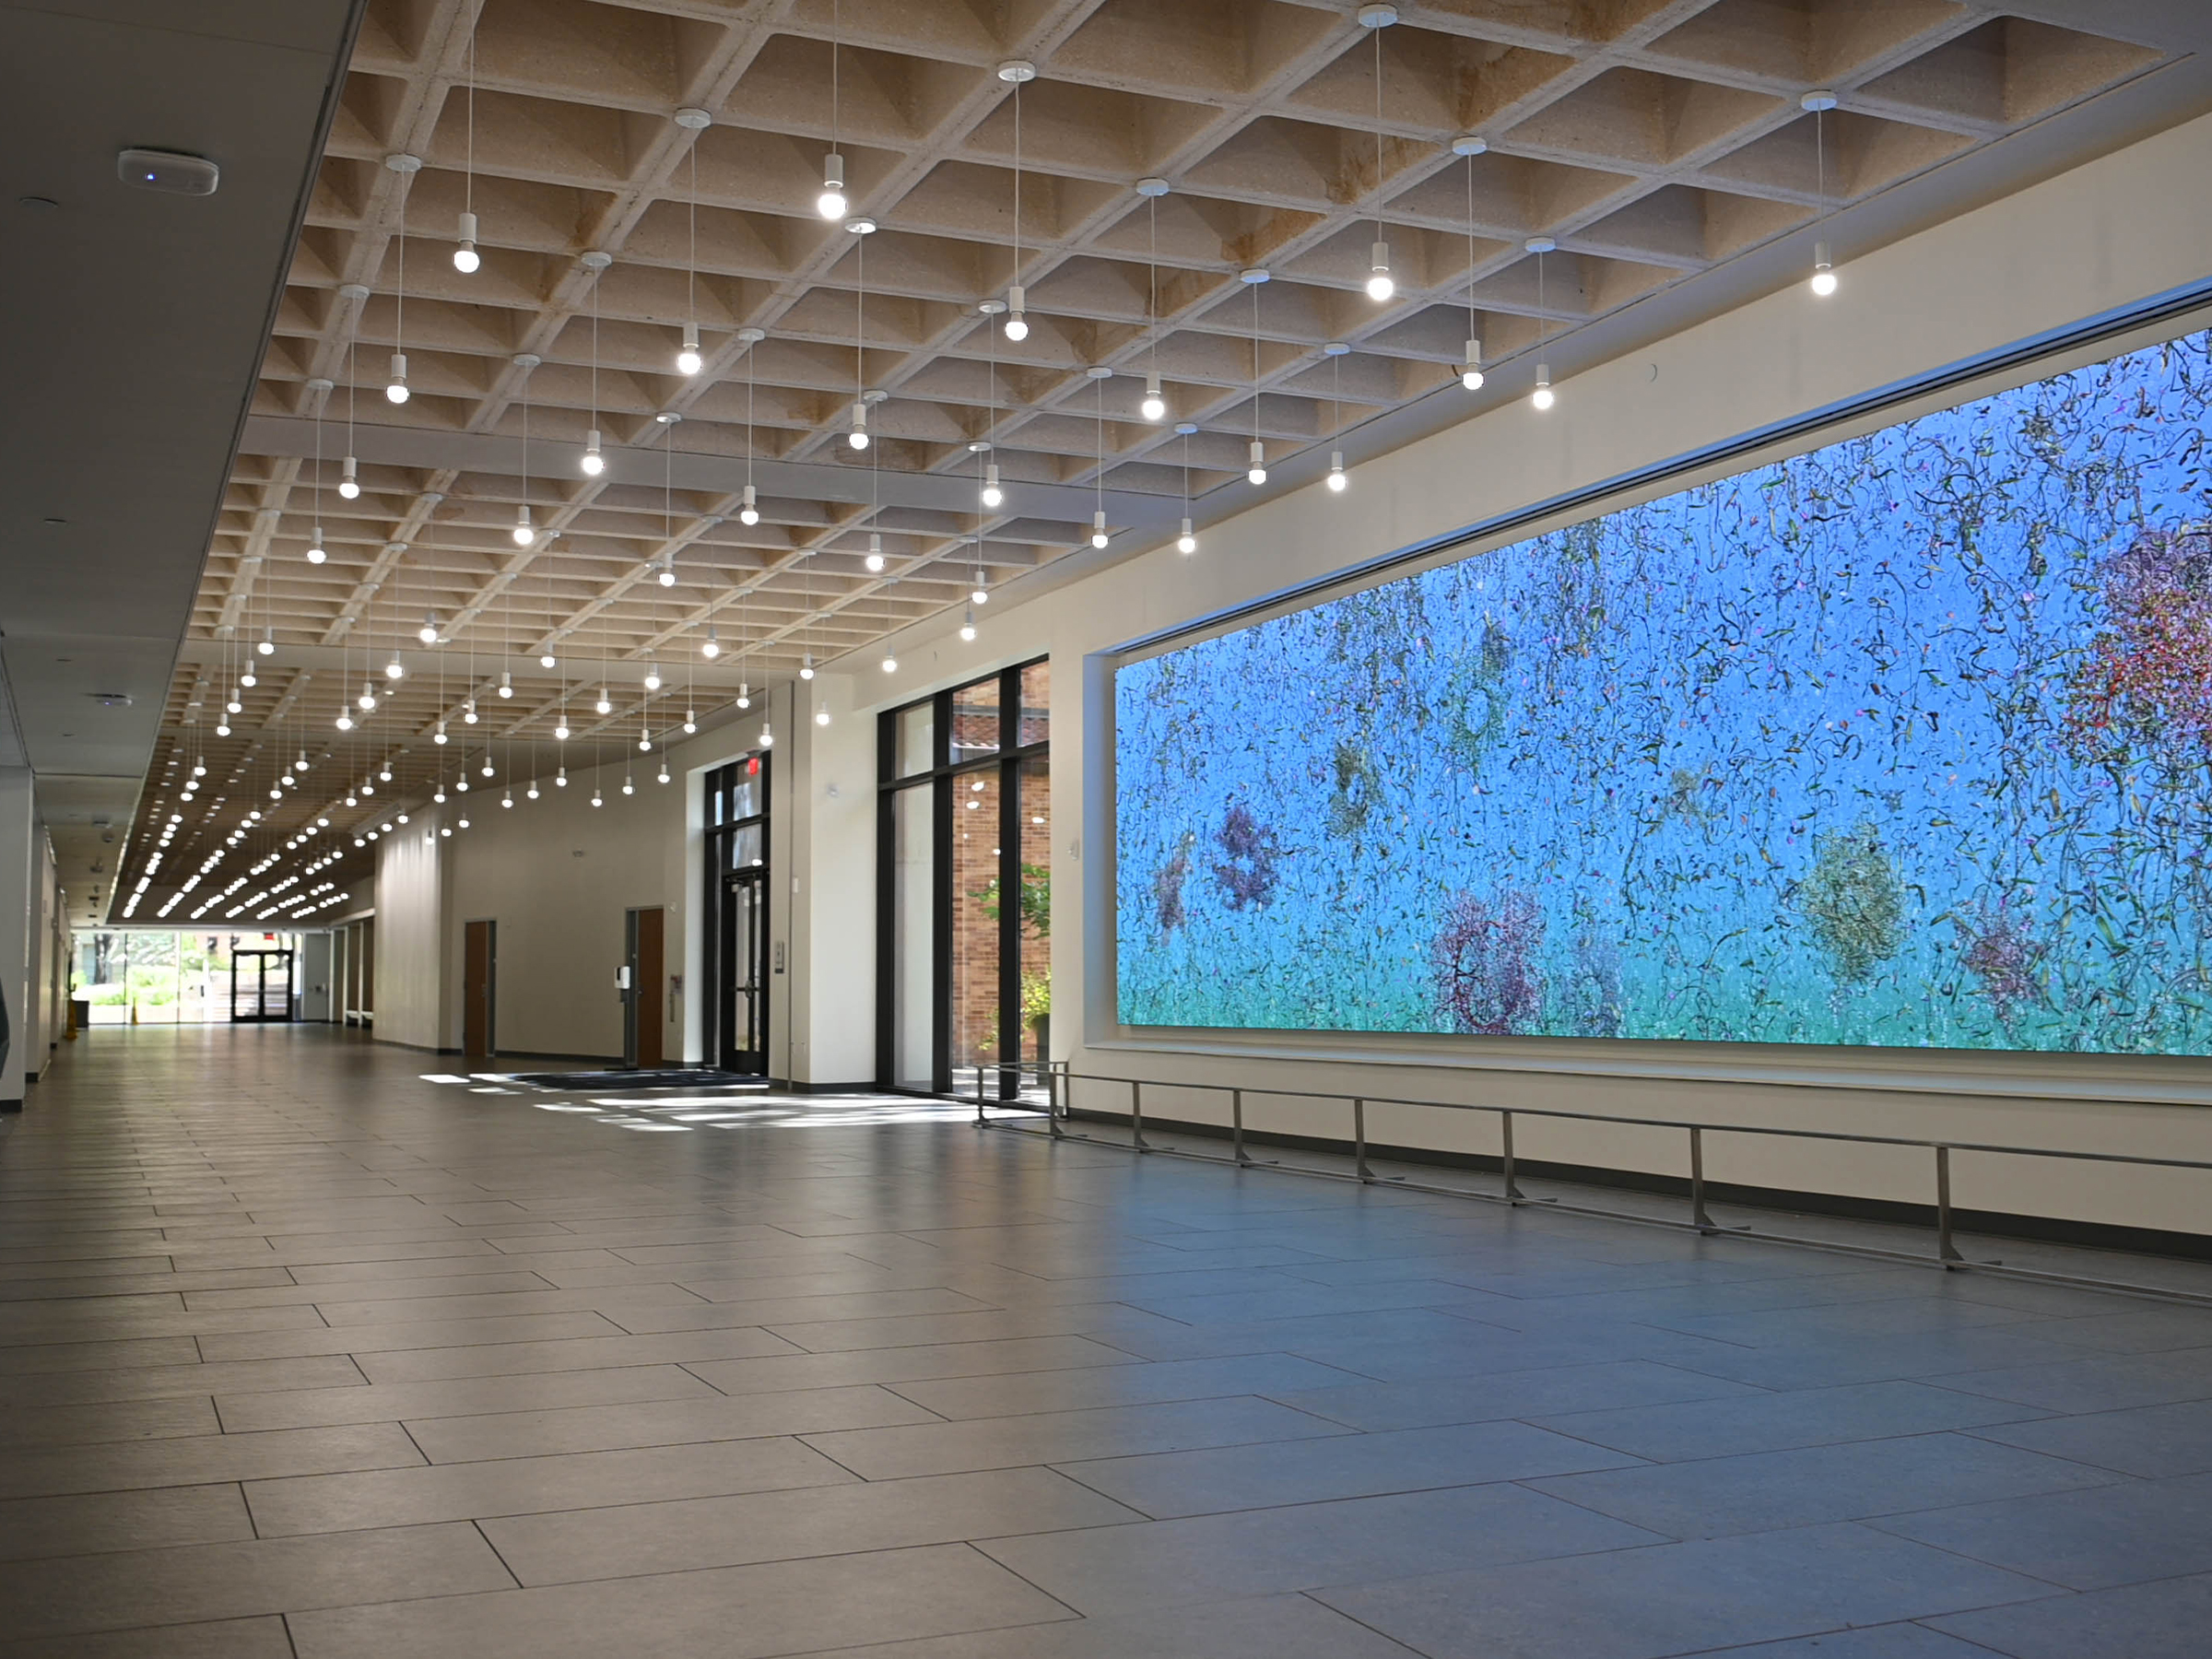 Photo of video artwork entitled "Eon" in the Welch Hall grand concourse. Video image includes 3-D models of abstract organic matter on a blue, aquatic background. 